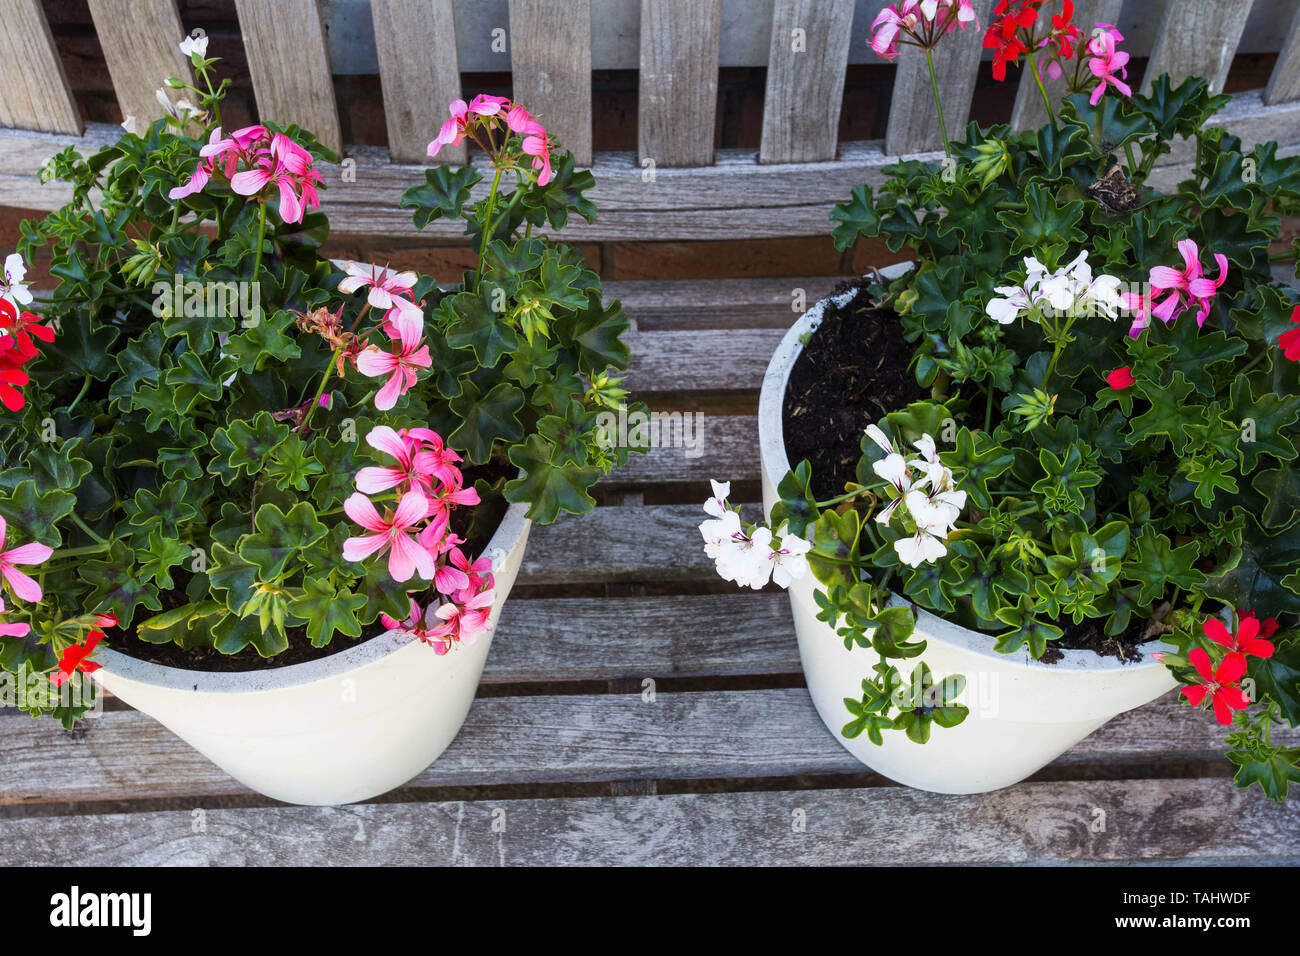 Two garden pots filled with colorful flowers on a wooden bench Stock Photo